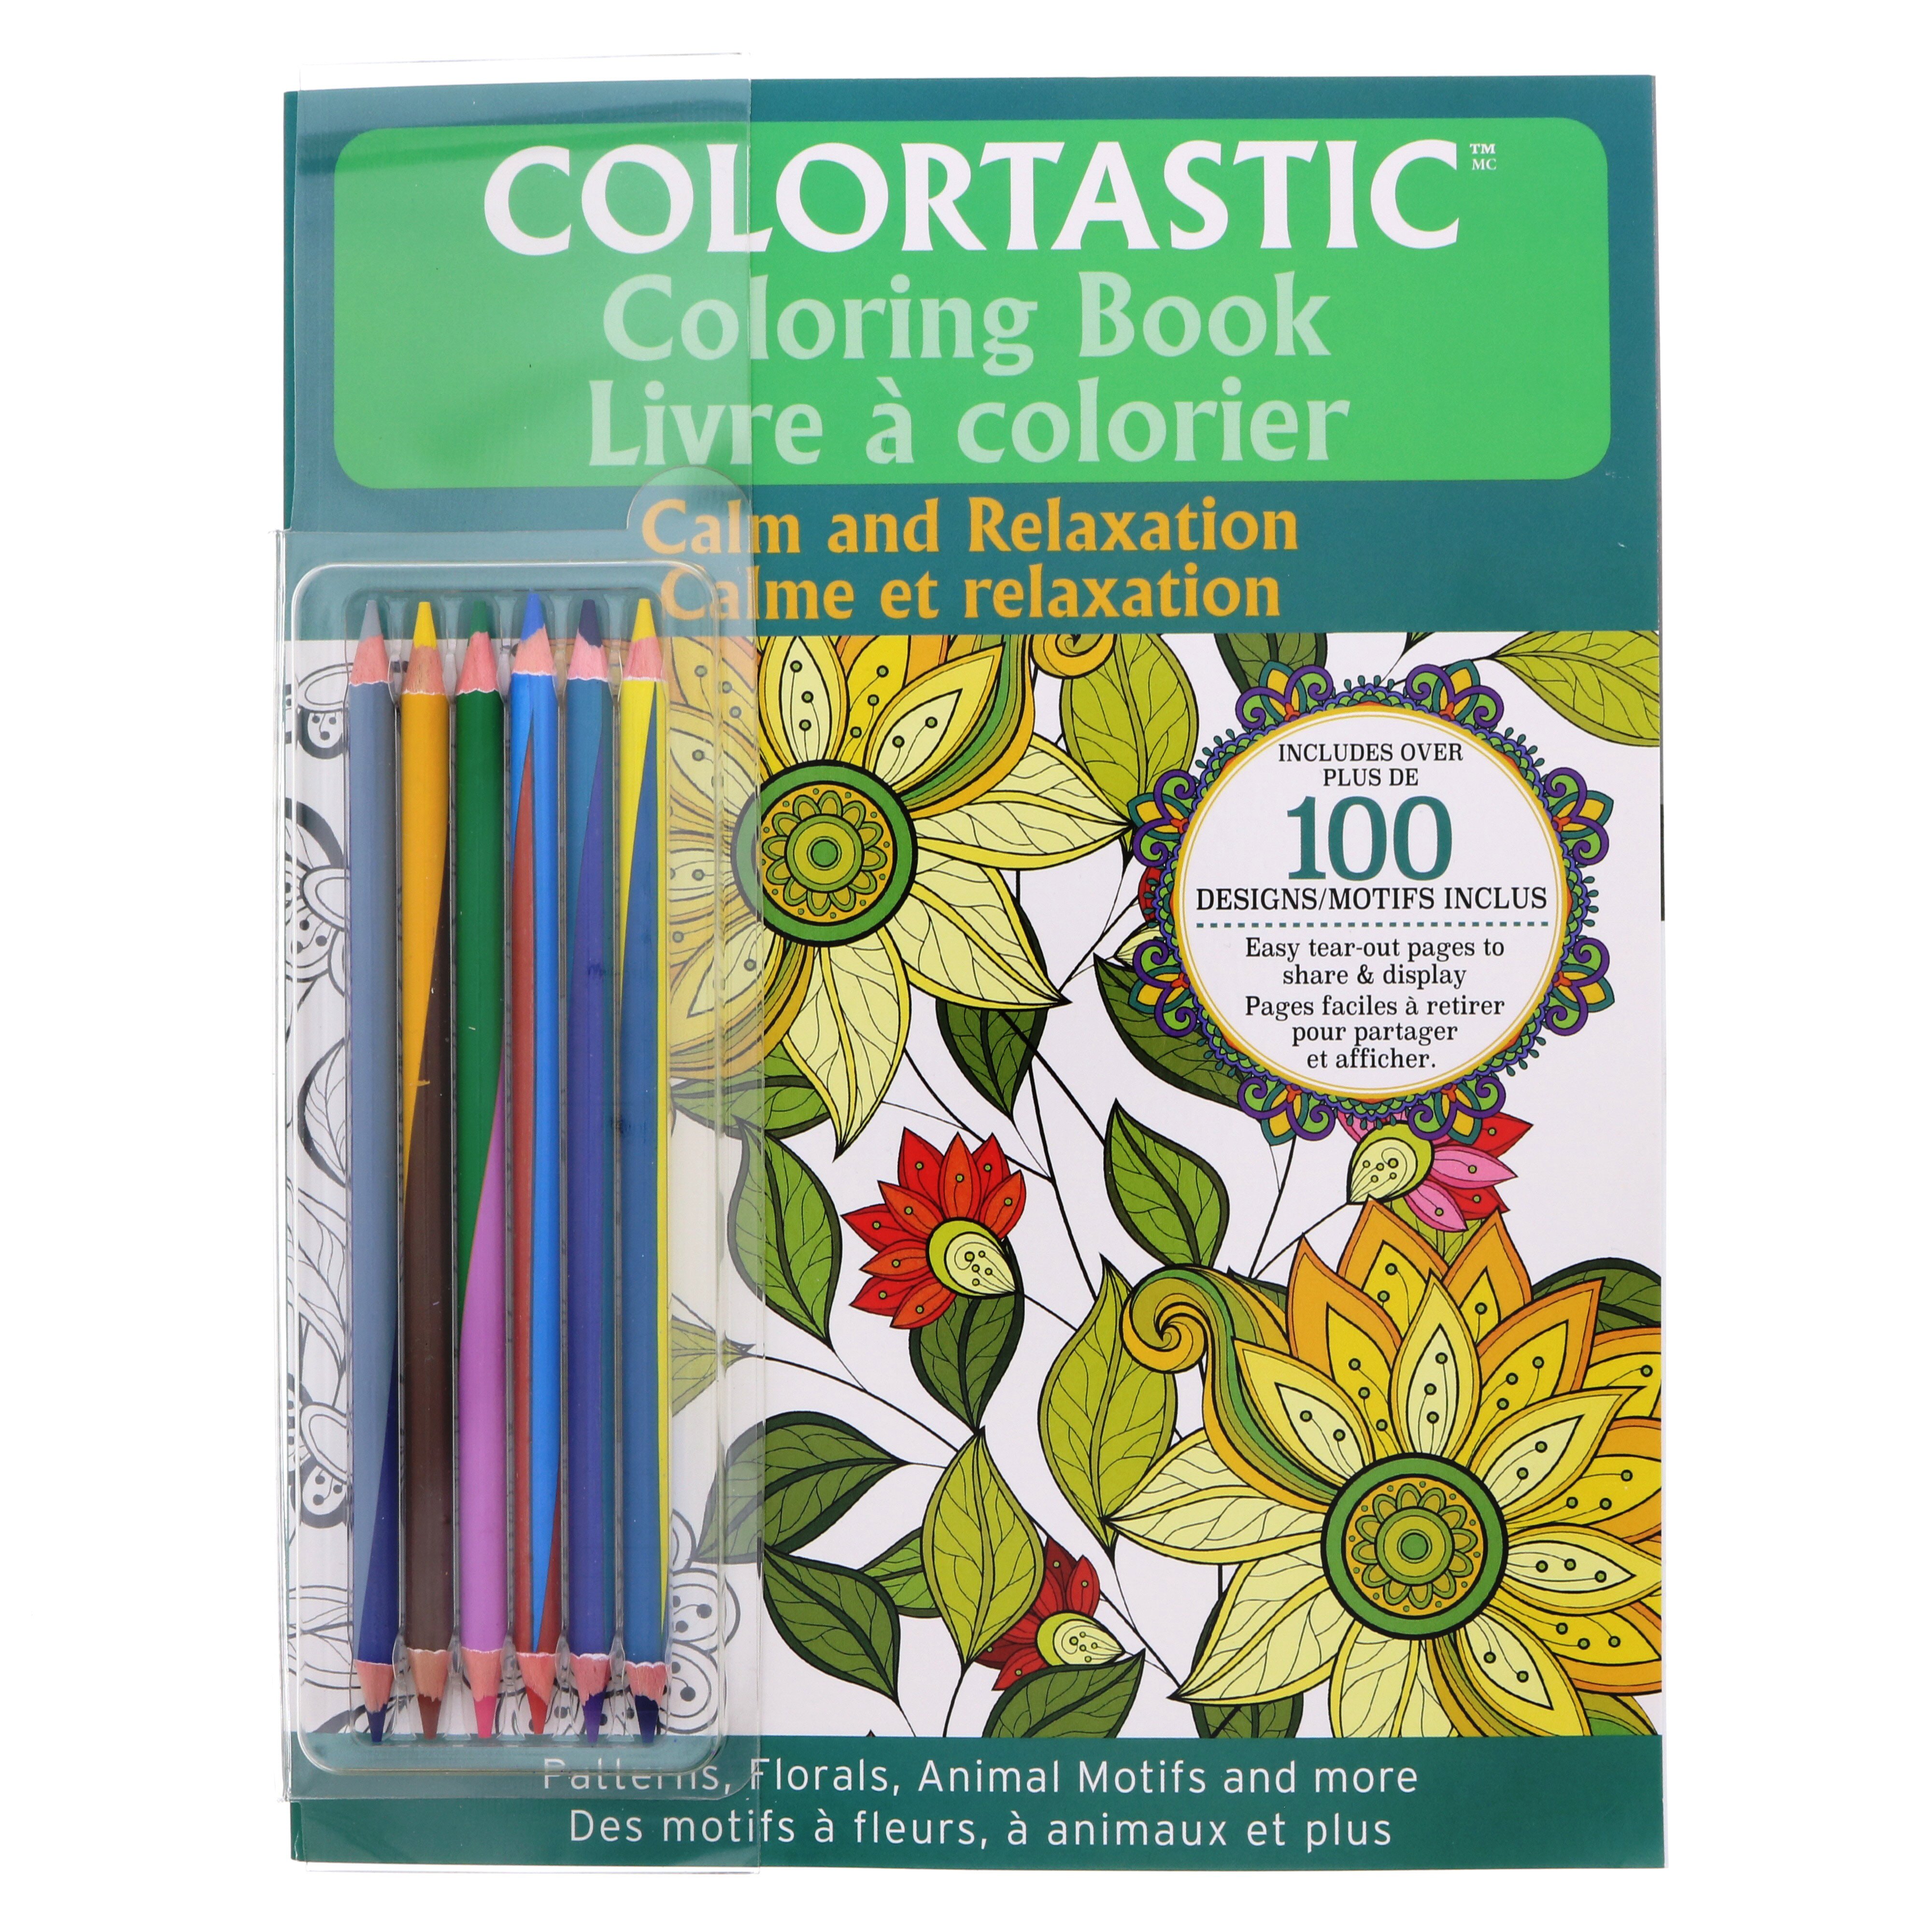 Download Colortastic Adult Coloring Book With Pencil: Calm & Relaxation - Shop Books & Magazines at H-E-B